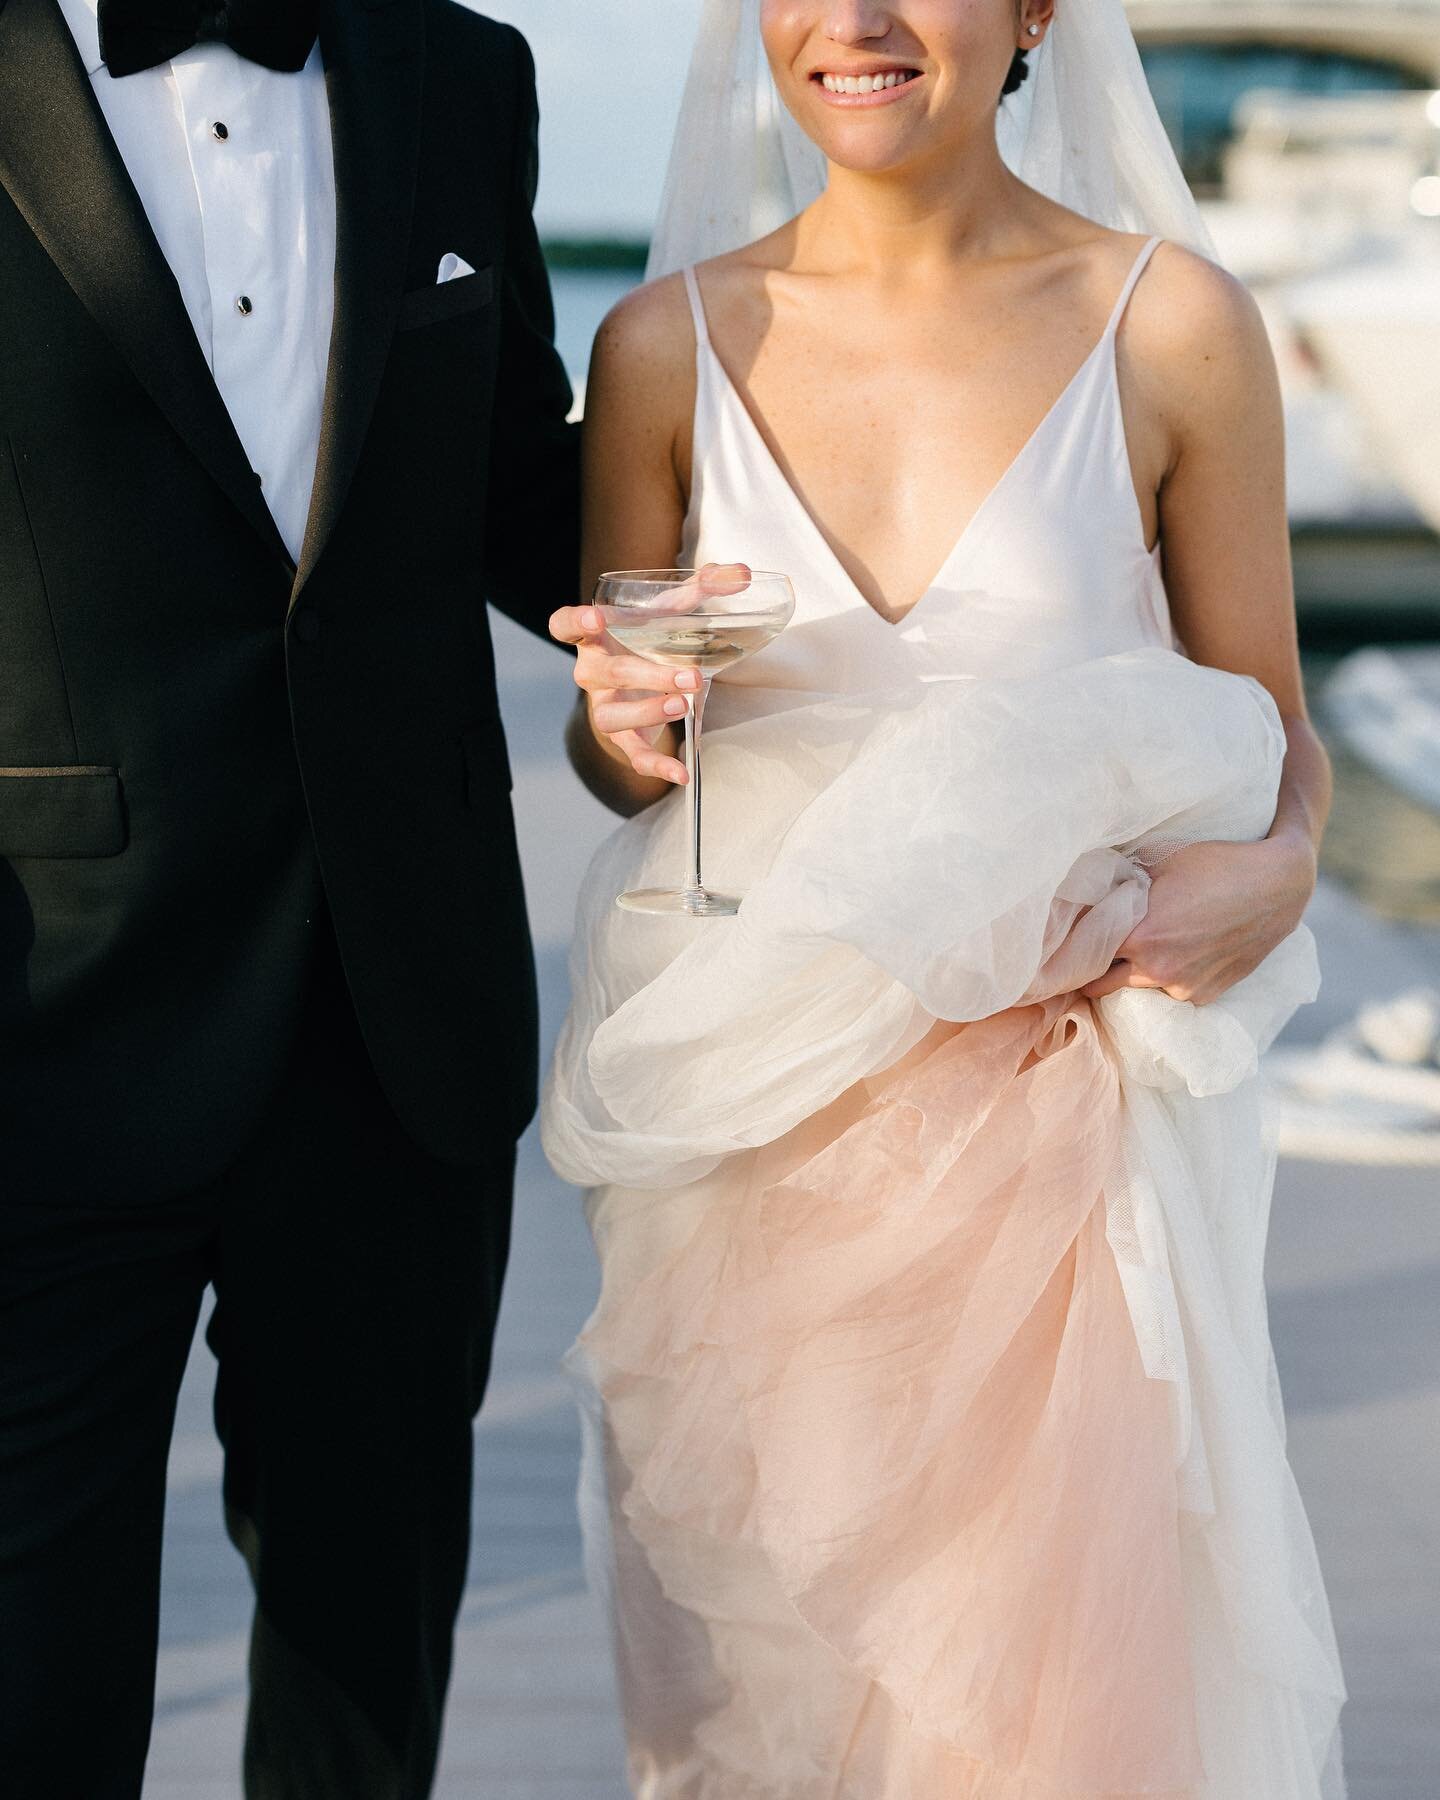 @steffiweisson is actually my favorite. Her blush @alarobe silk satin gown and blush dip-dye organza skirt suited her beautifully, we LOVE our non-traditional brides! 

Swipe right for happily ever after 💕